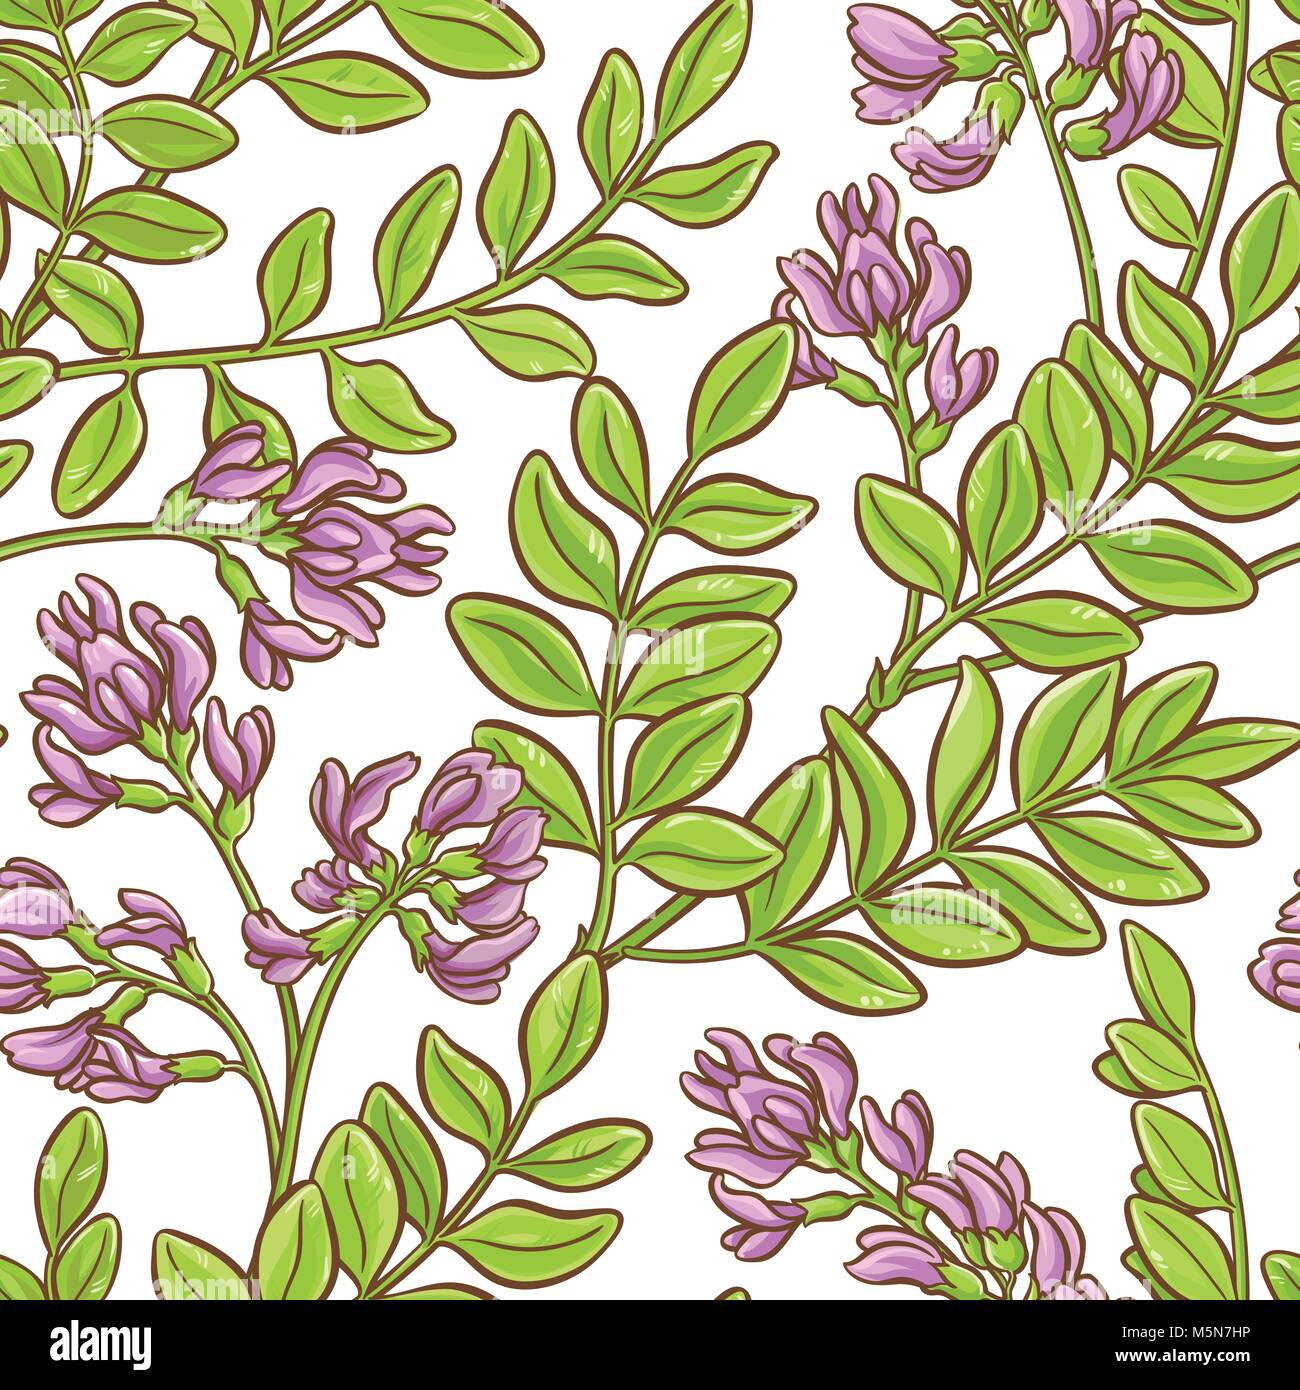 astragalus plant vector pattern on white background Stock Vector